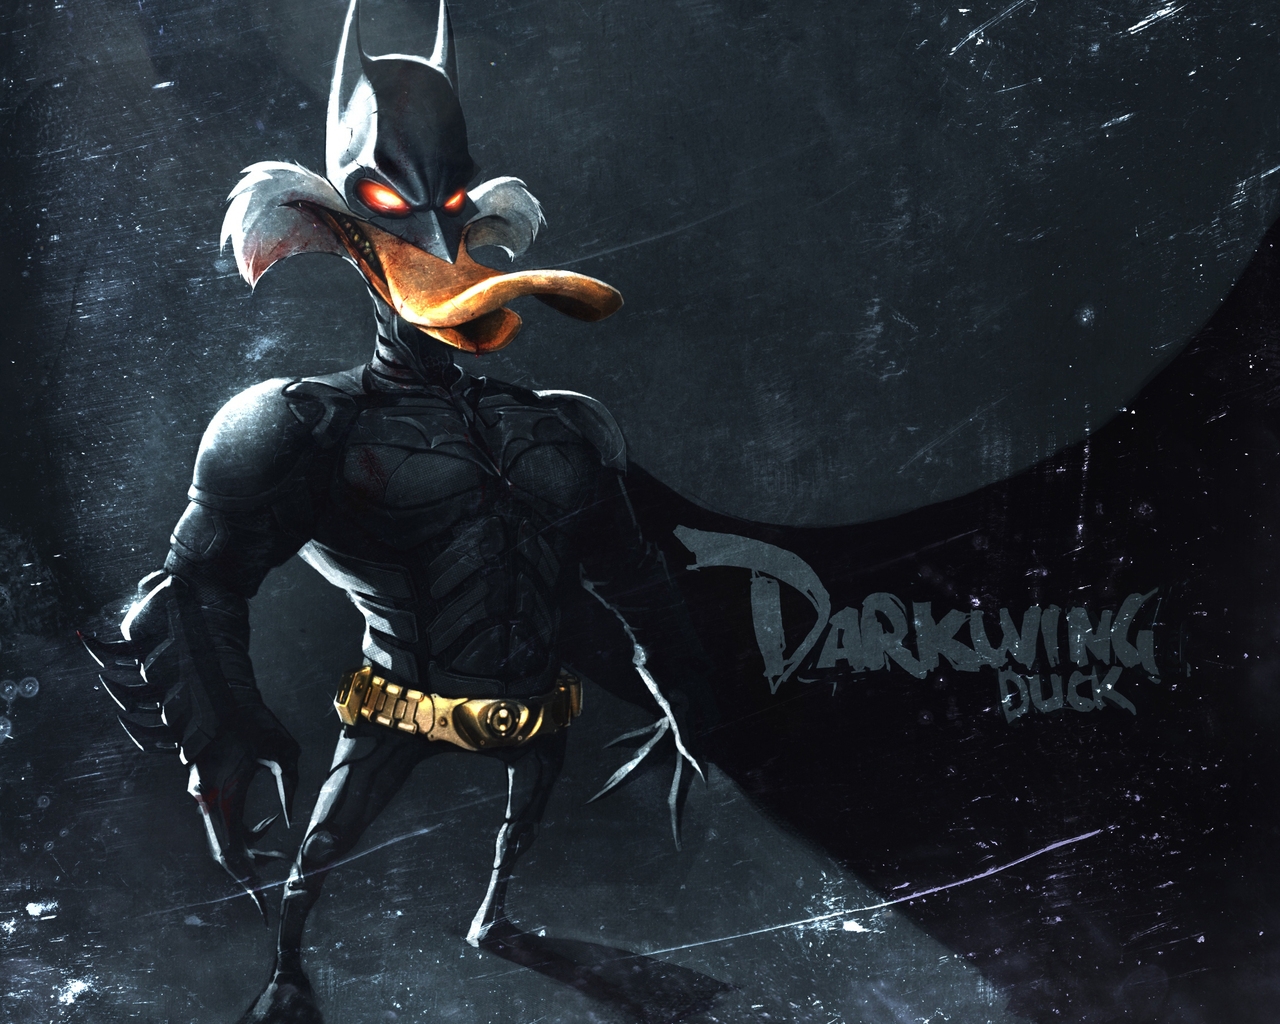 Darkwing Duck Mask for 1280 x 1024 resolution